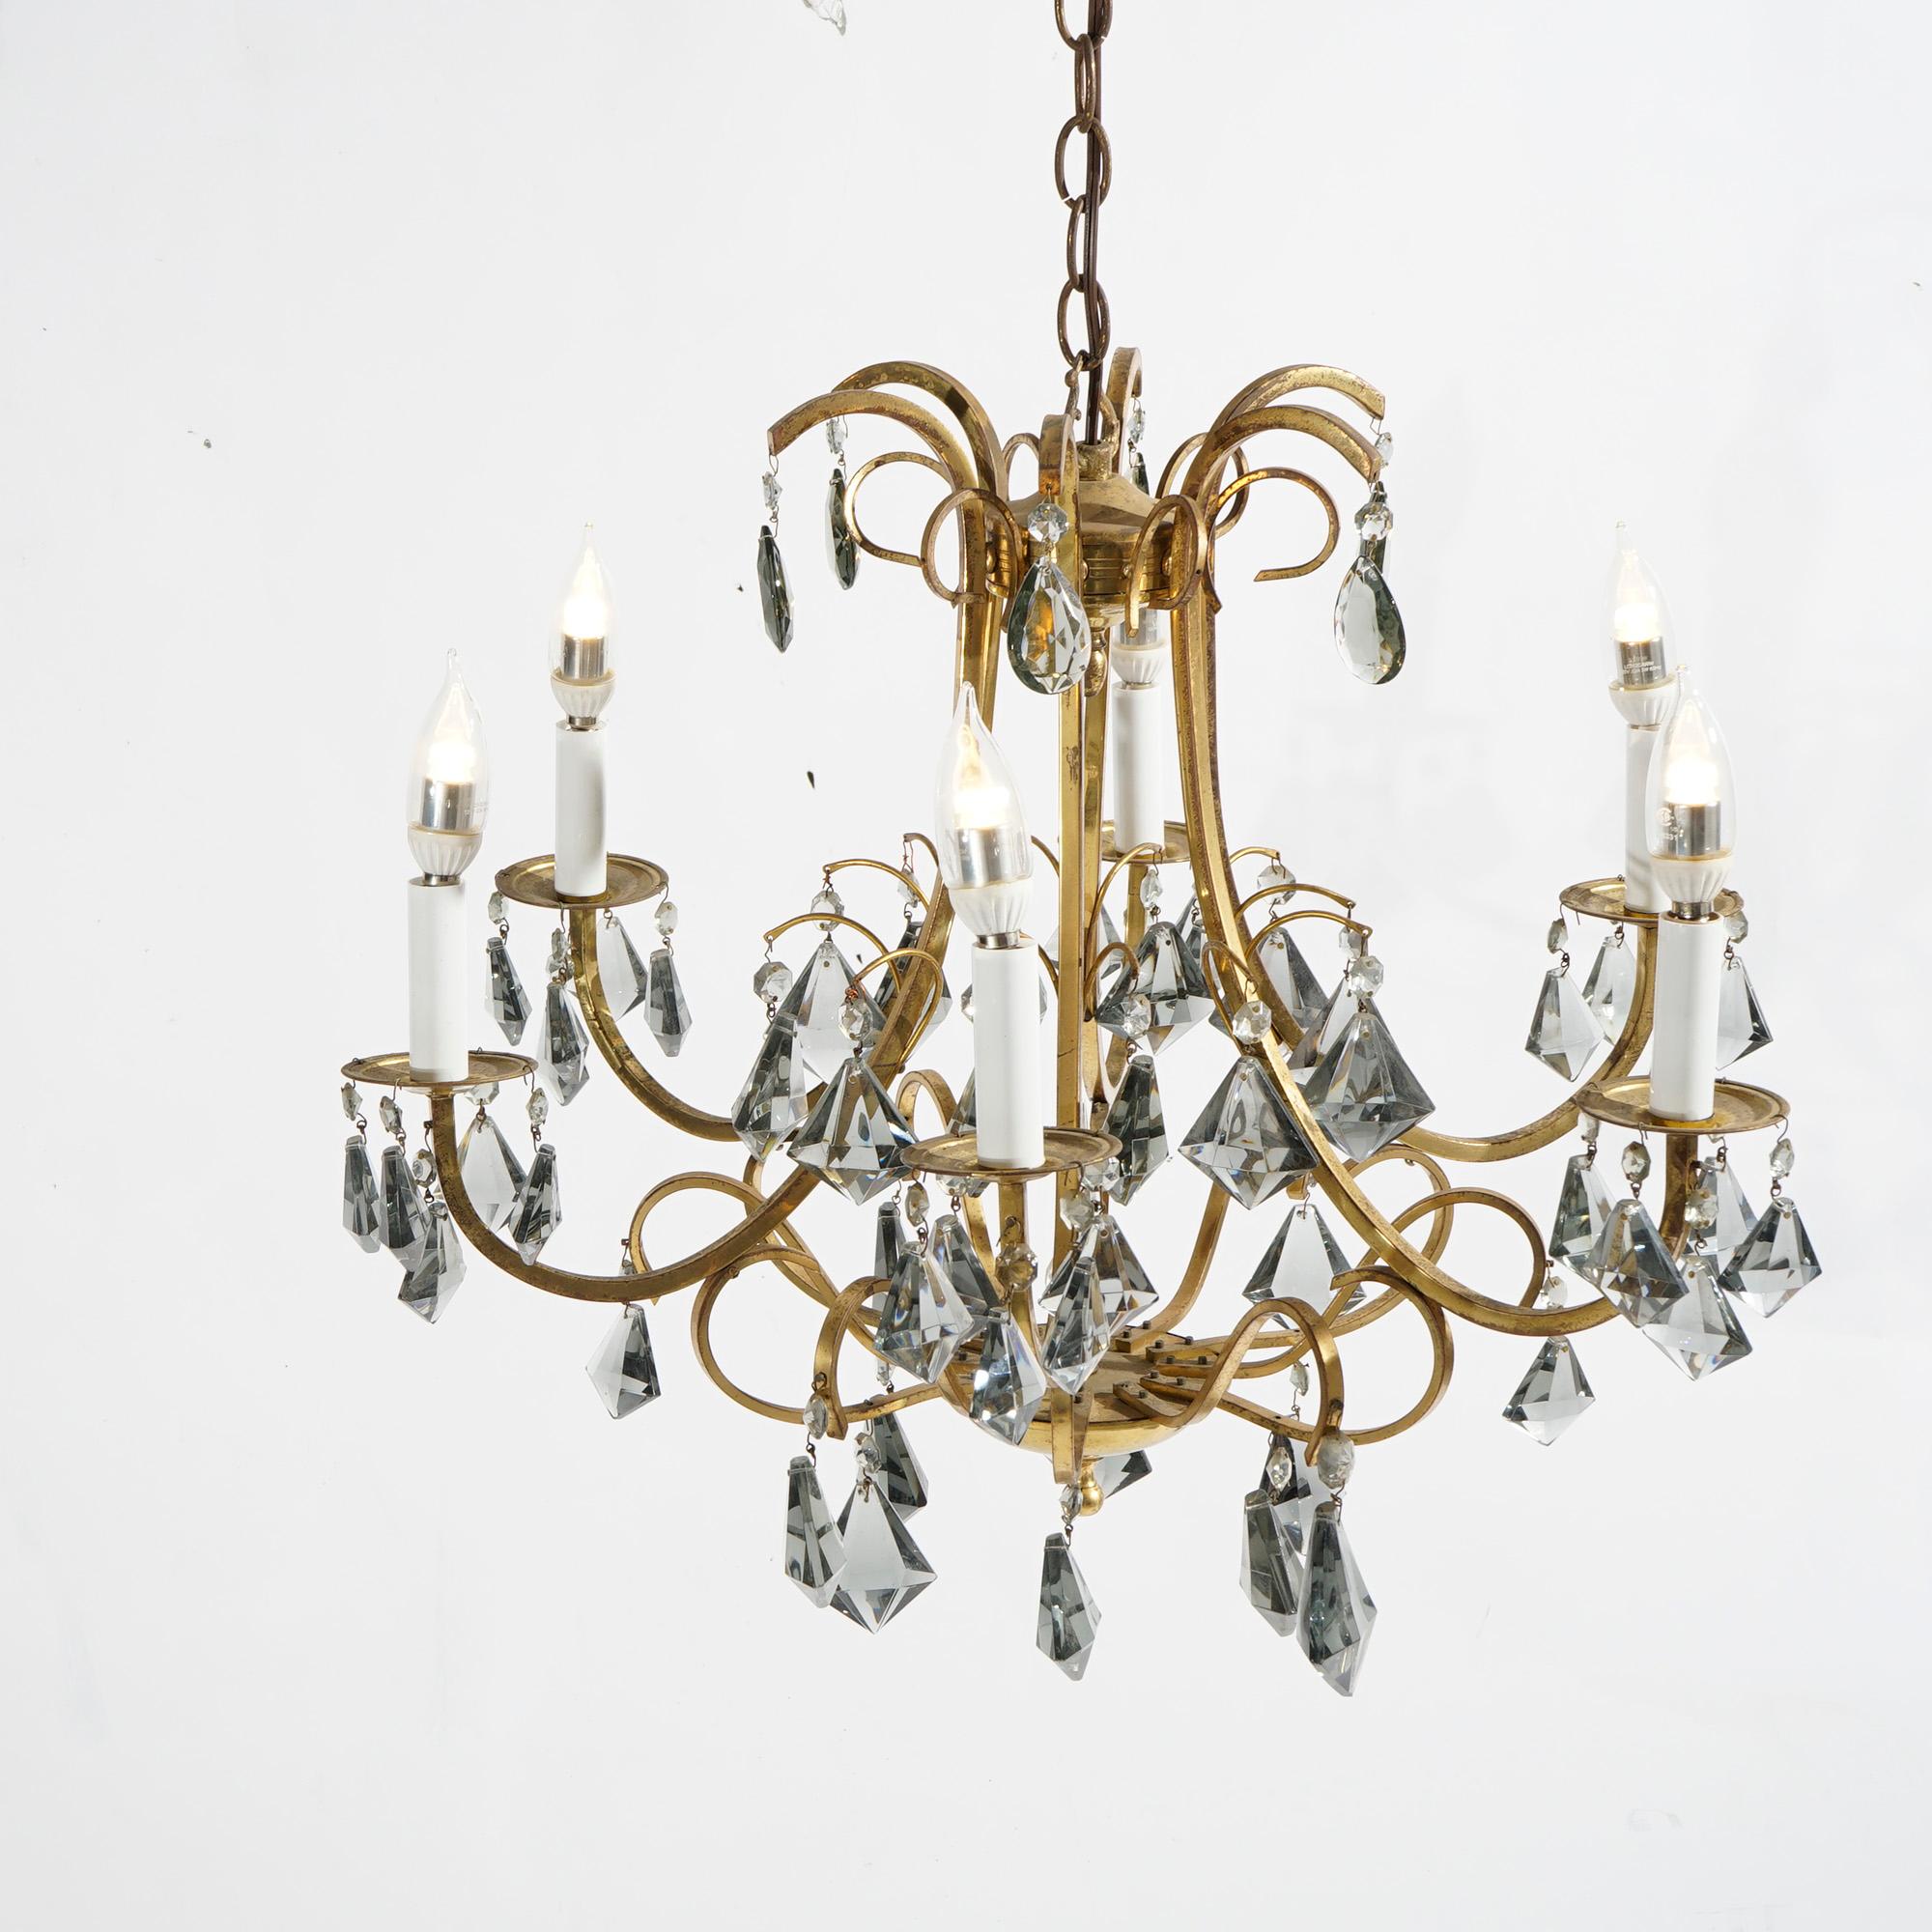 20th Century French Style Gilt Metal & Cut Crystal Six Light Chandelier Circa 1930 For Sale